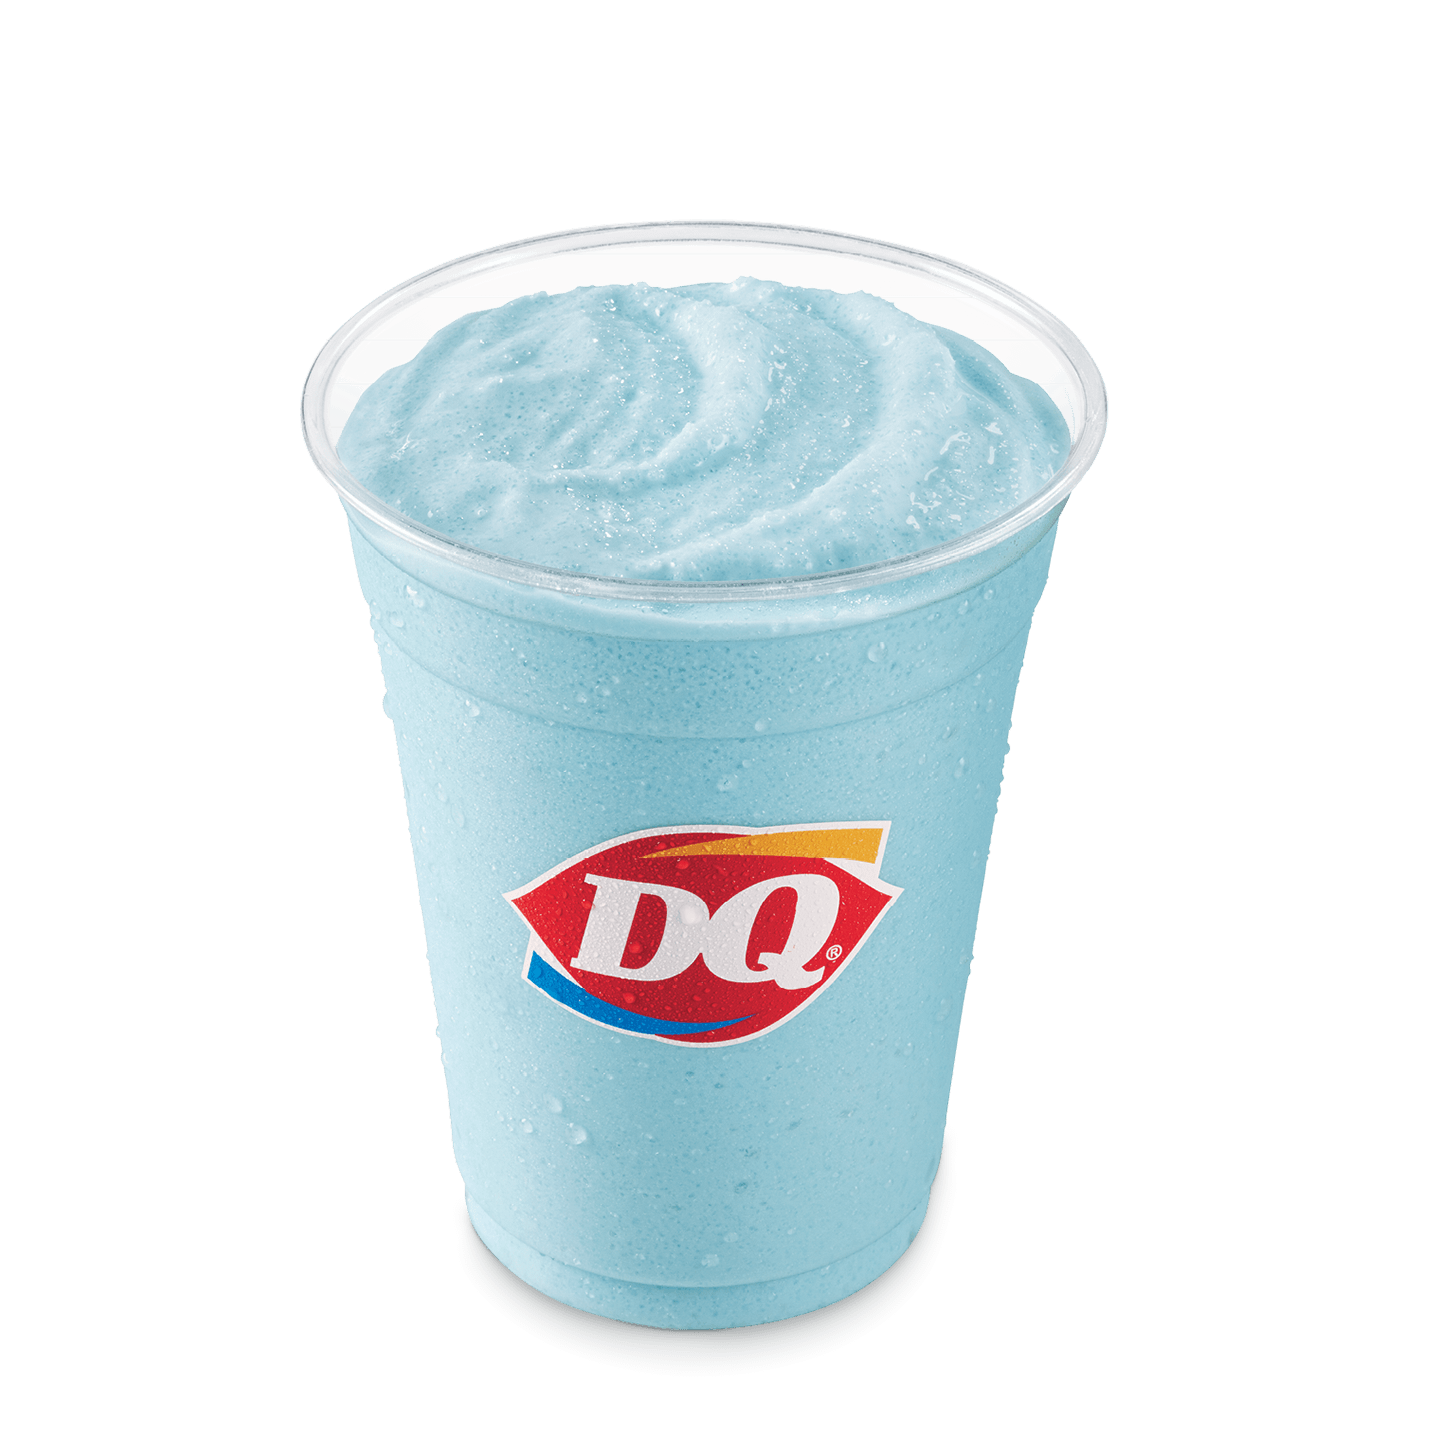 what drinks does dairy queen have?